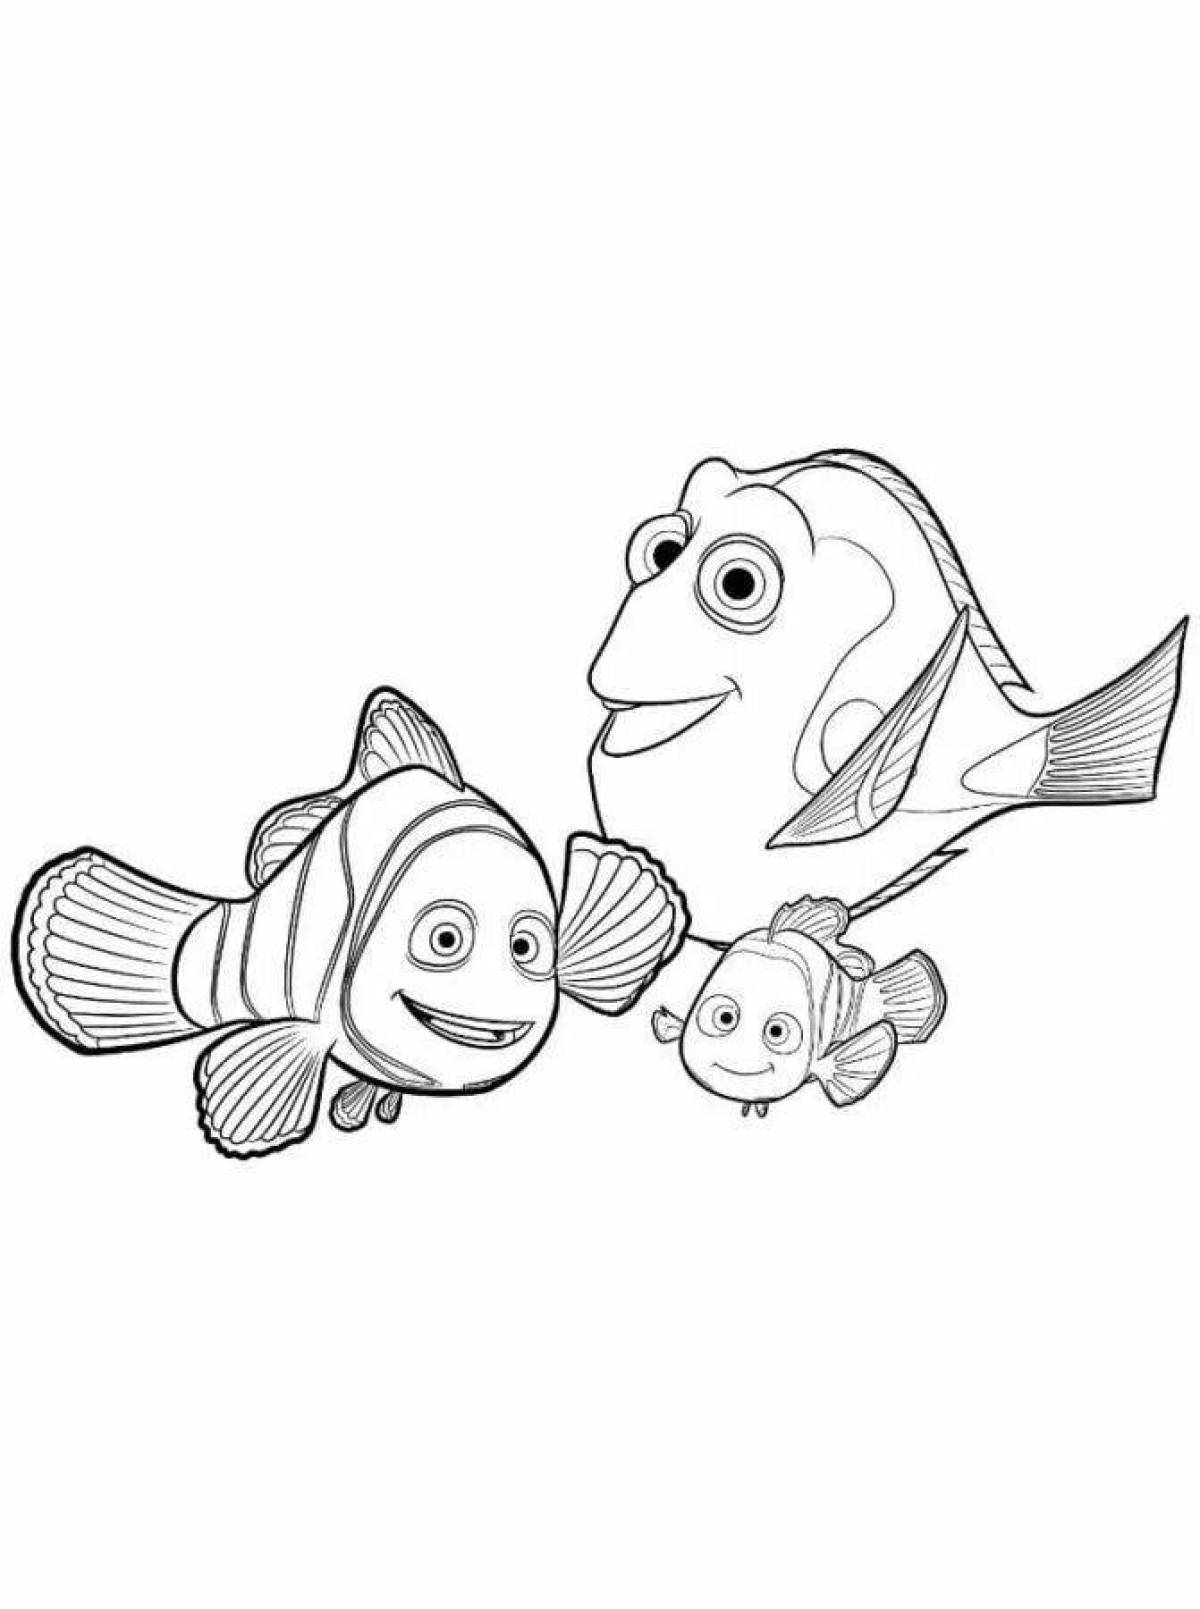 Glowing dory fish coloring page